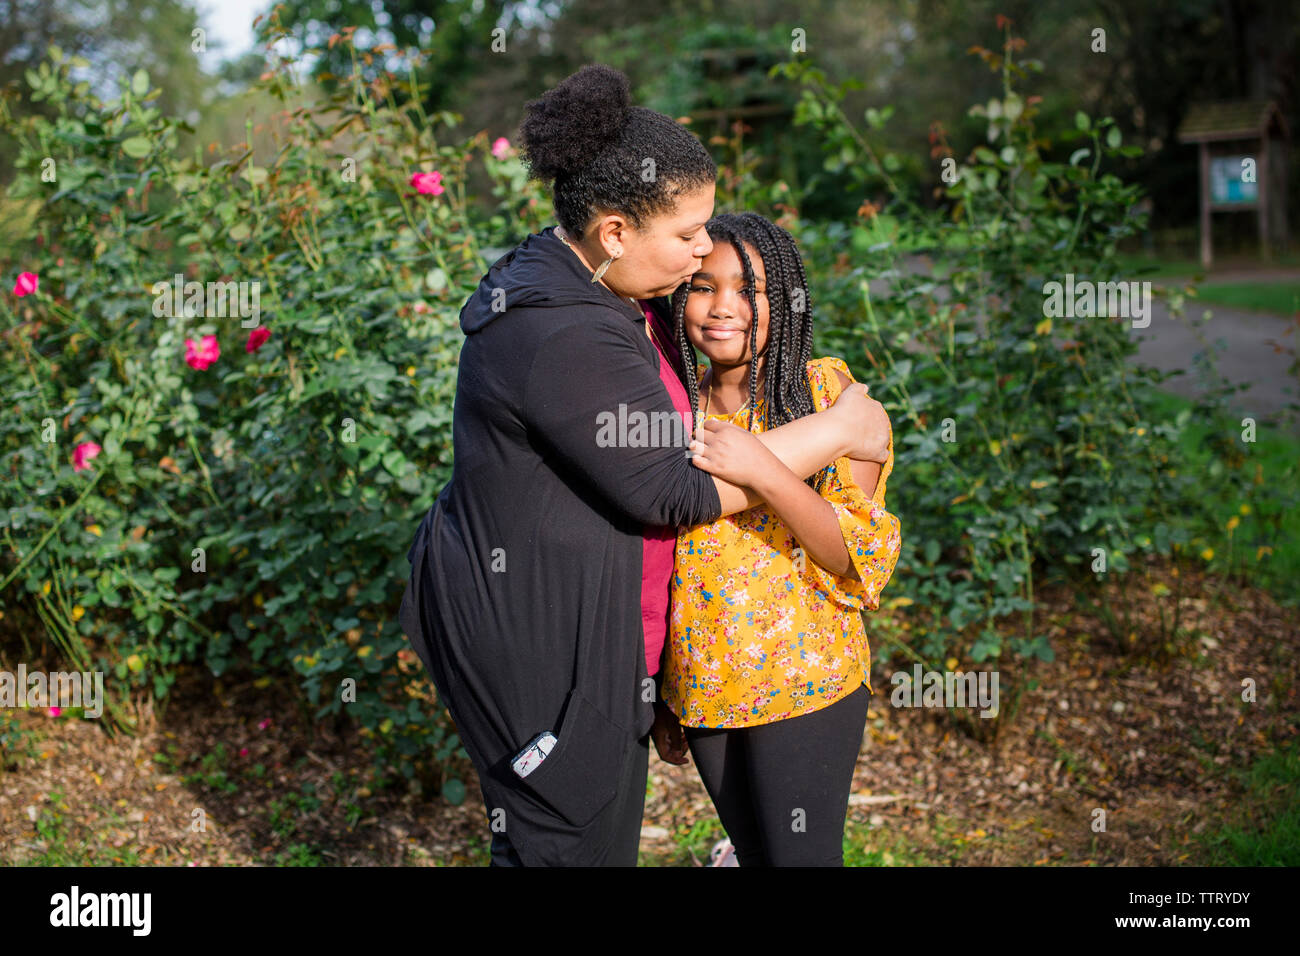 Mother kissing daughter on forehead while standing against plants in park Stock Photo